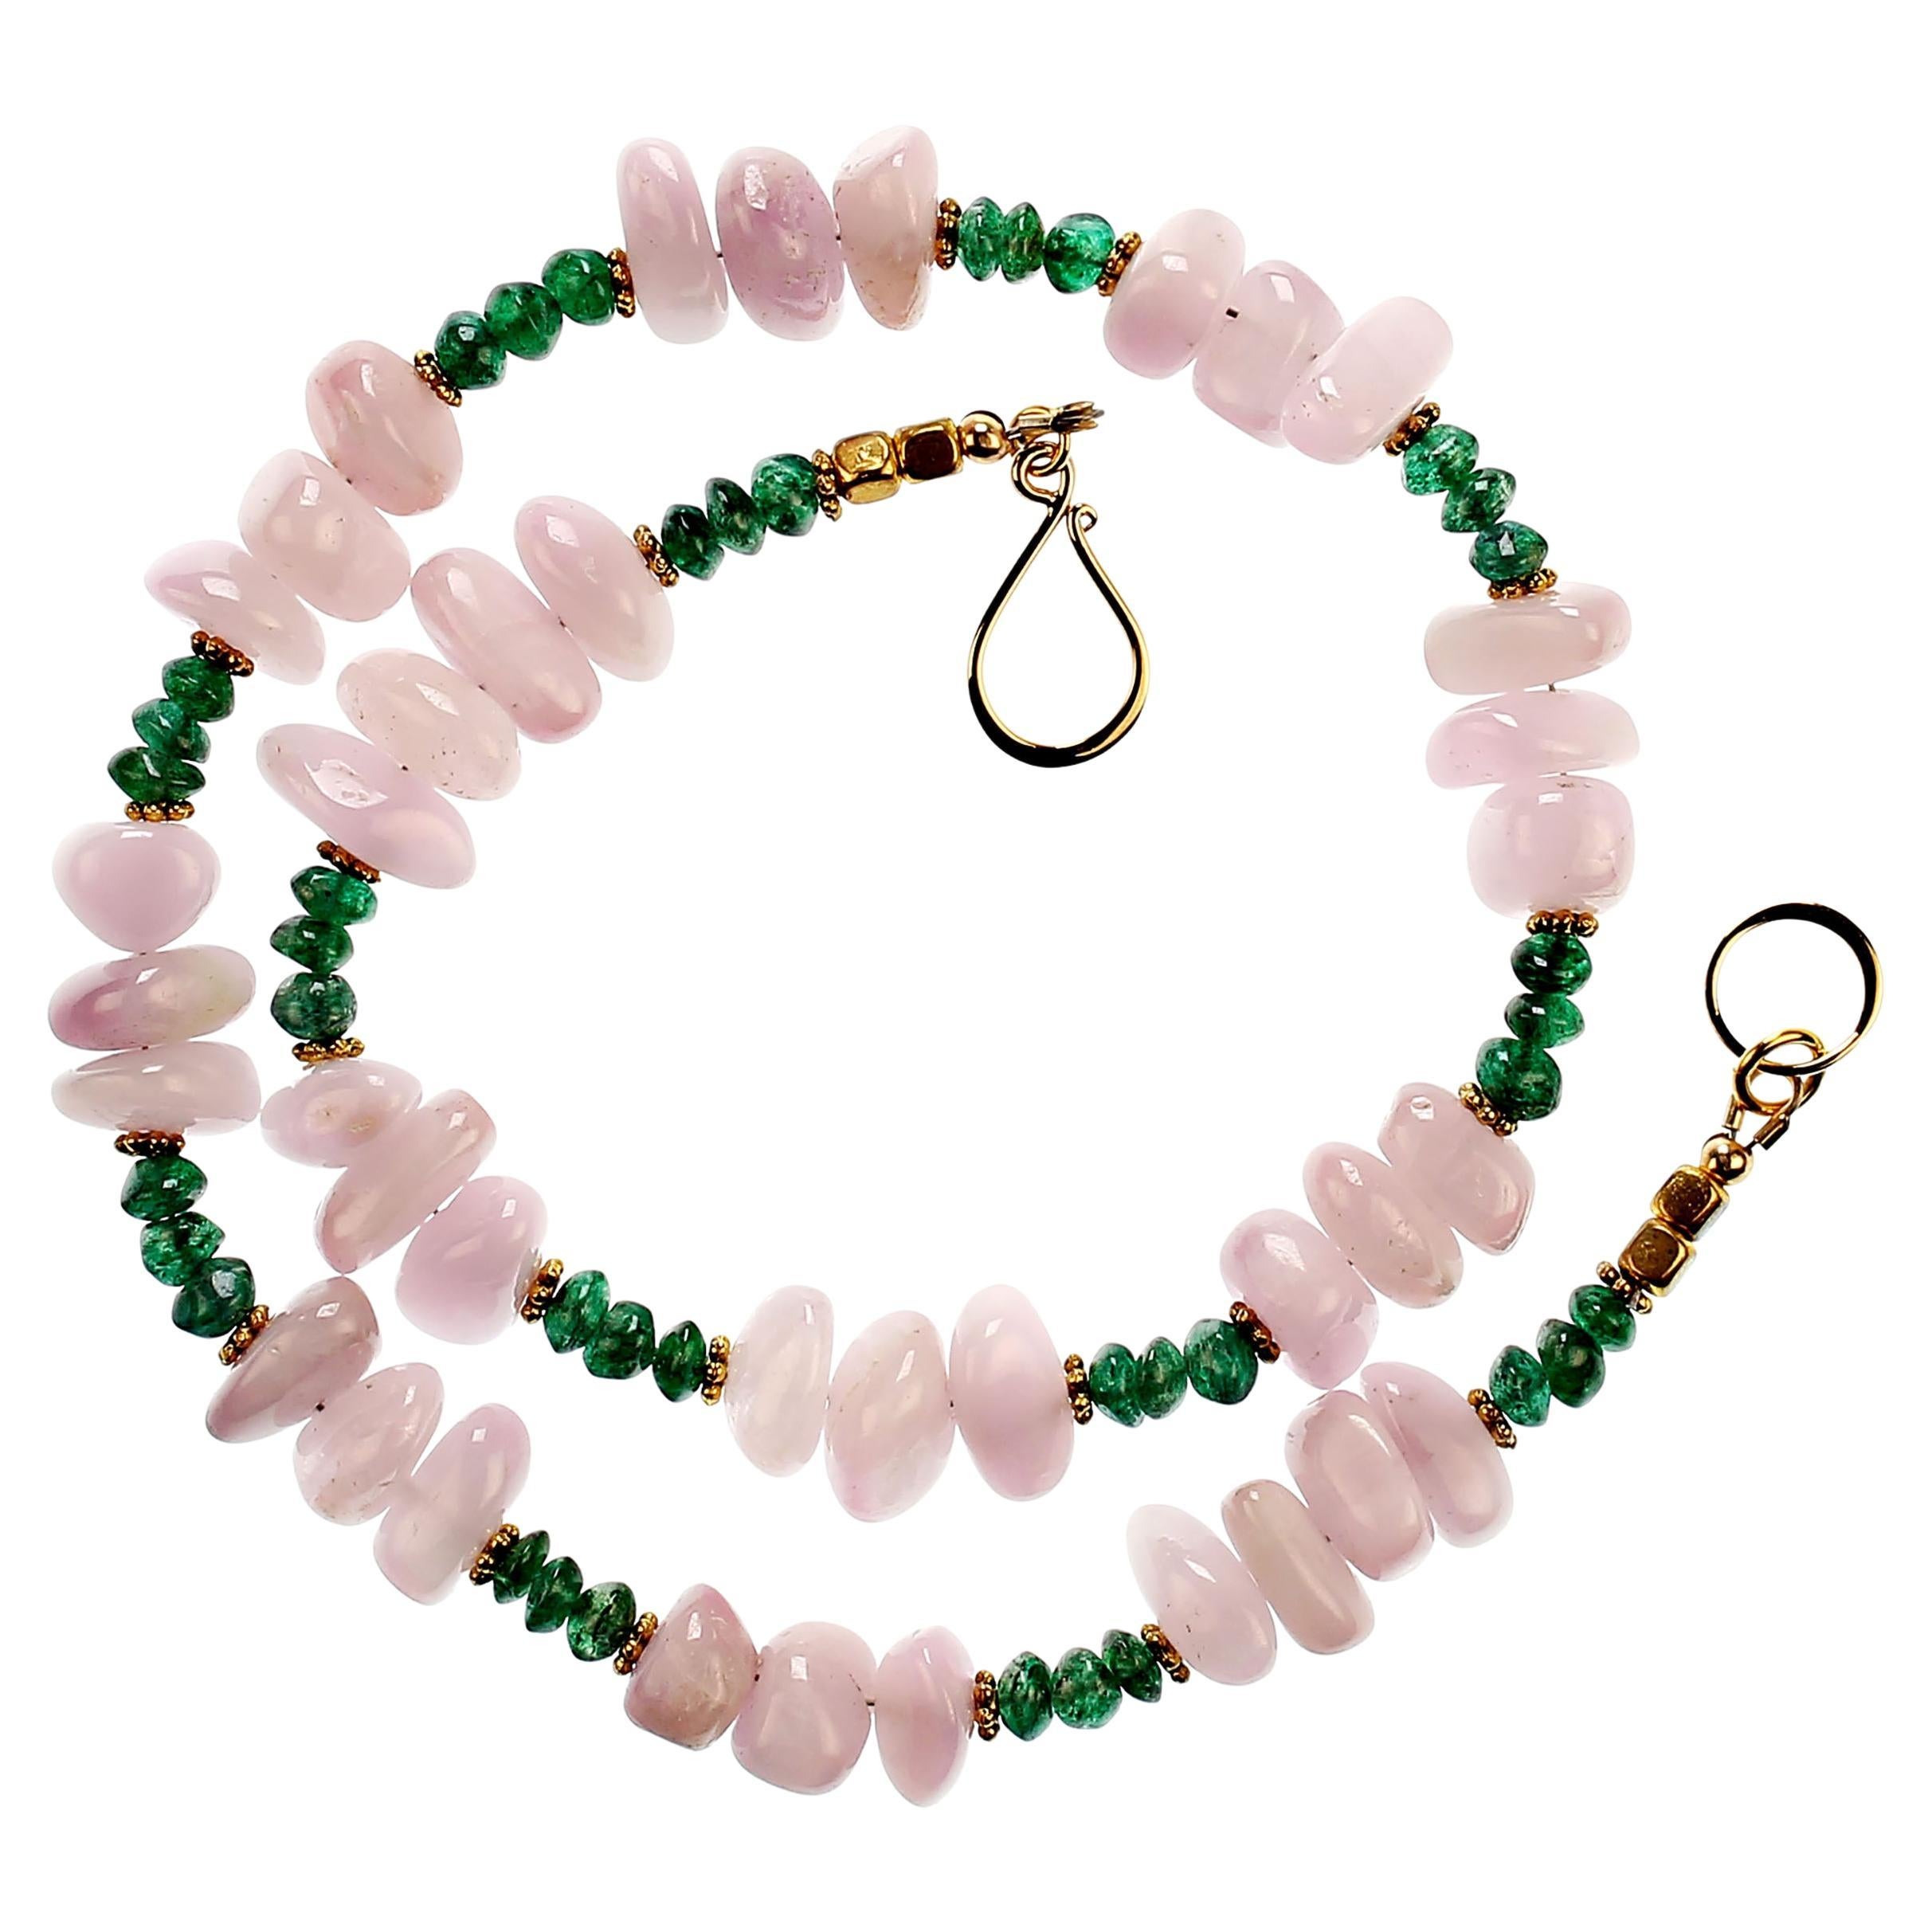 Unique necklace of highly polished Kunzite nuggets, 10 x 10 MM, in its best pinky-mauve shade combined with glorious green, green Aventurine rondelles, 5 MM. Accents of 22K over copper daisies and a 14K heavy gold plate hook and eye clasp. This 17